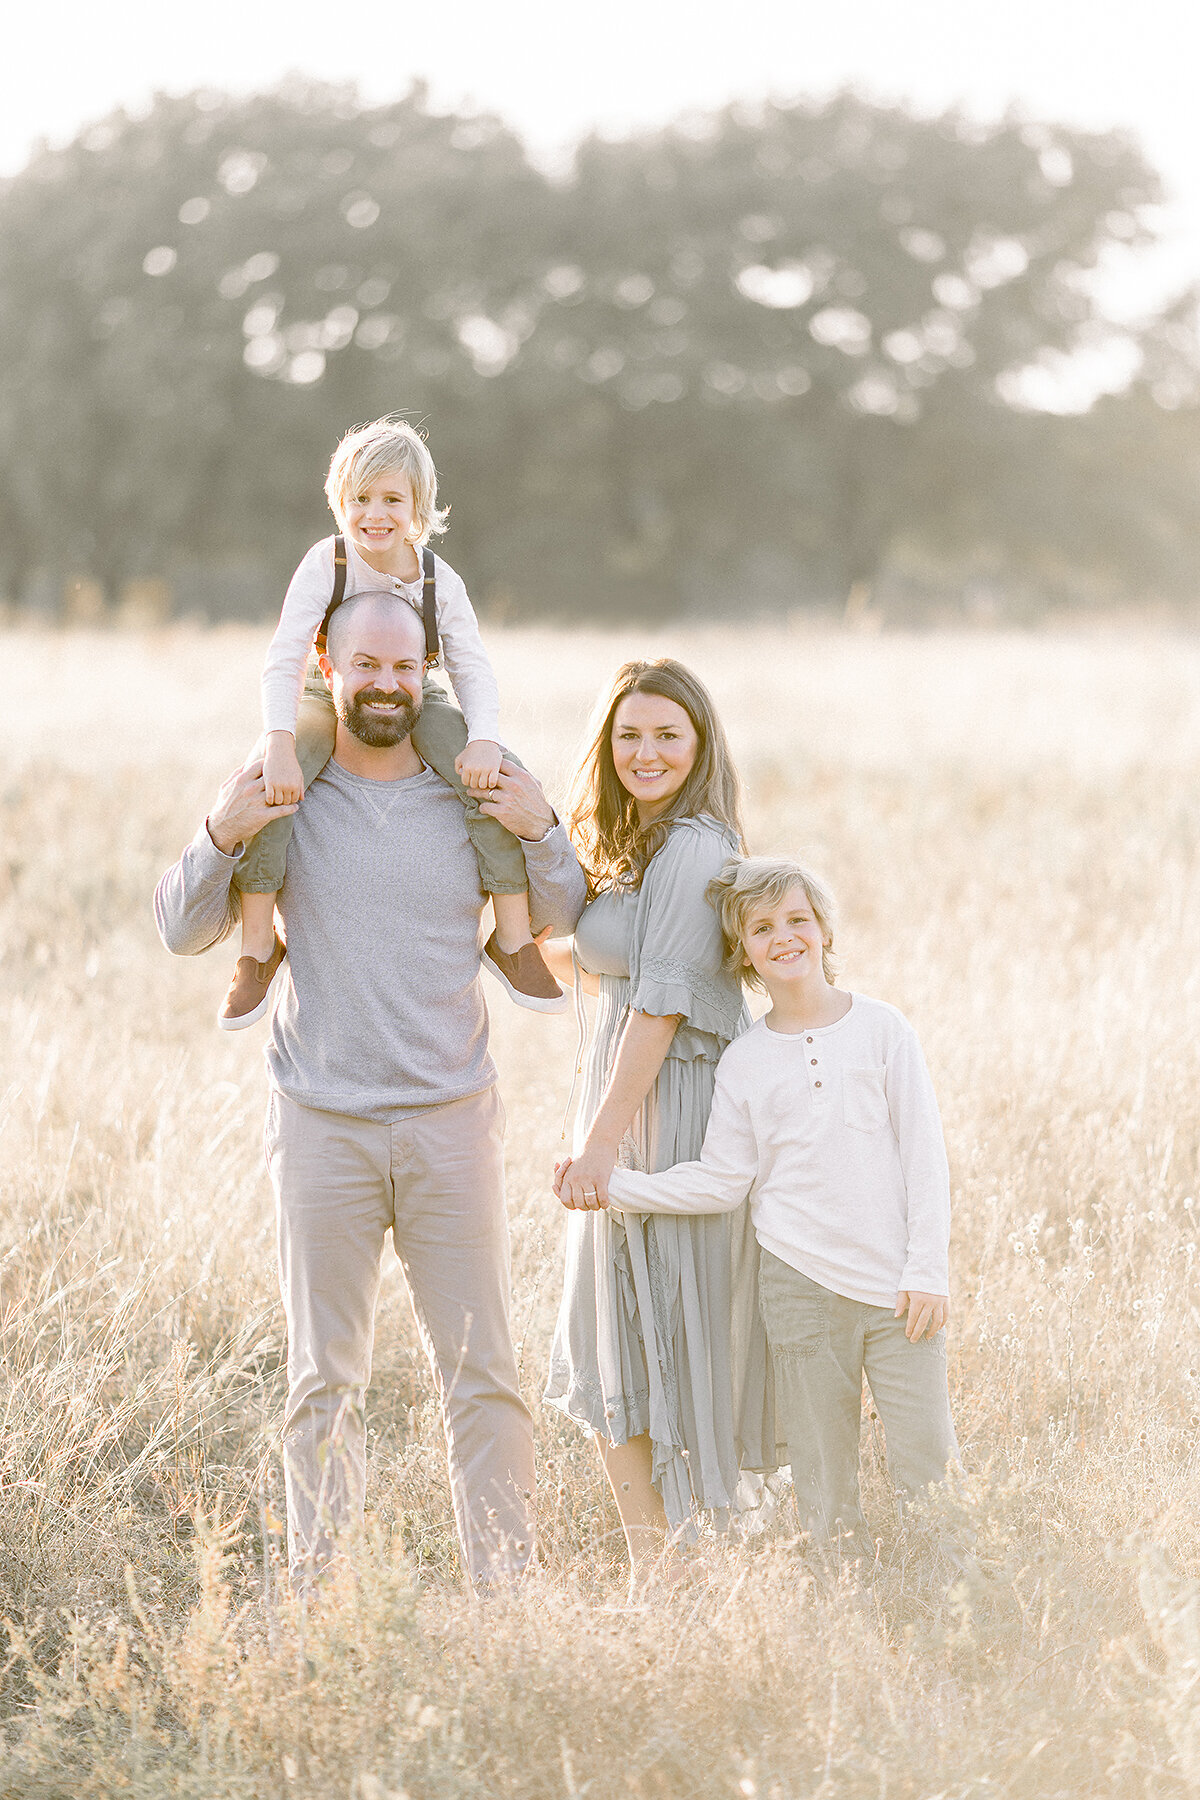 Beautiful family photo of a young family of 4 standing in the middle of an open grassy field at a Frisco park.